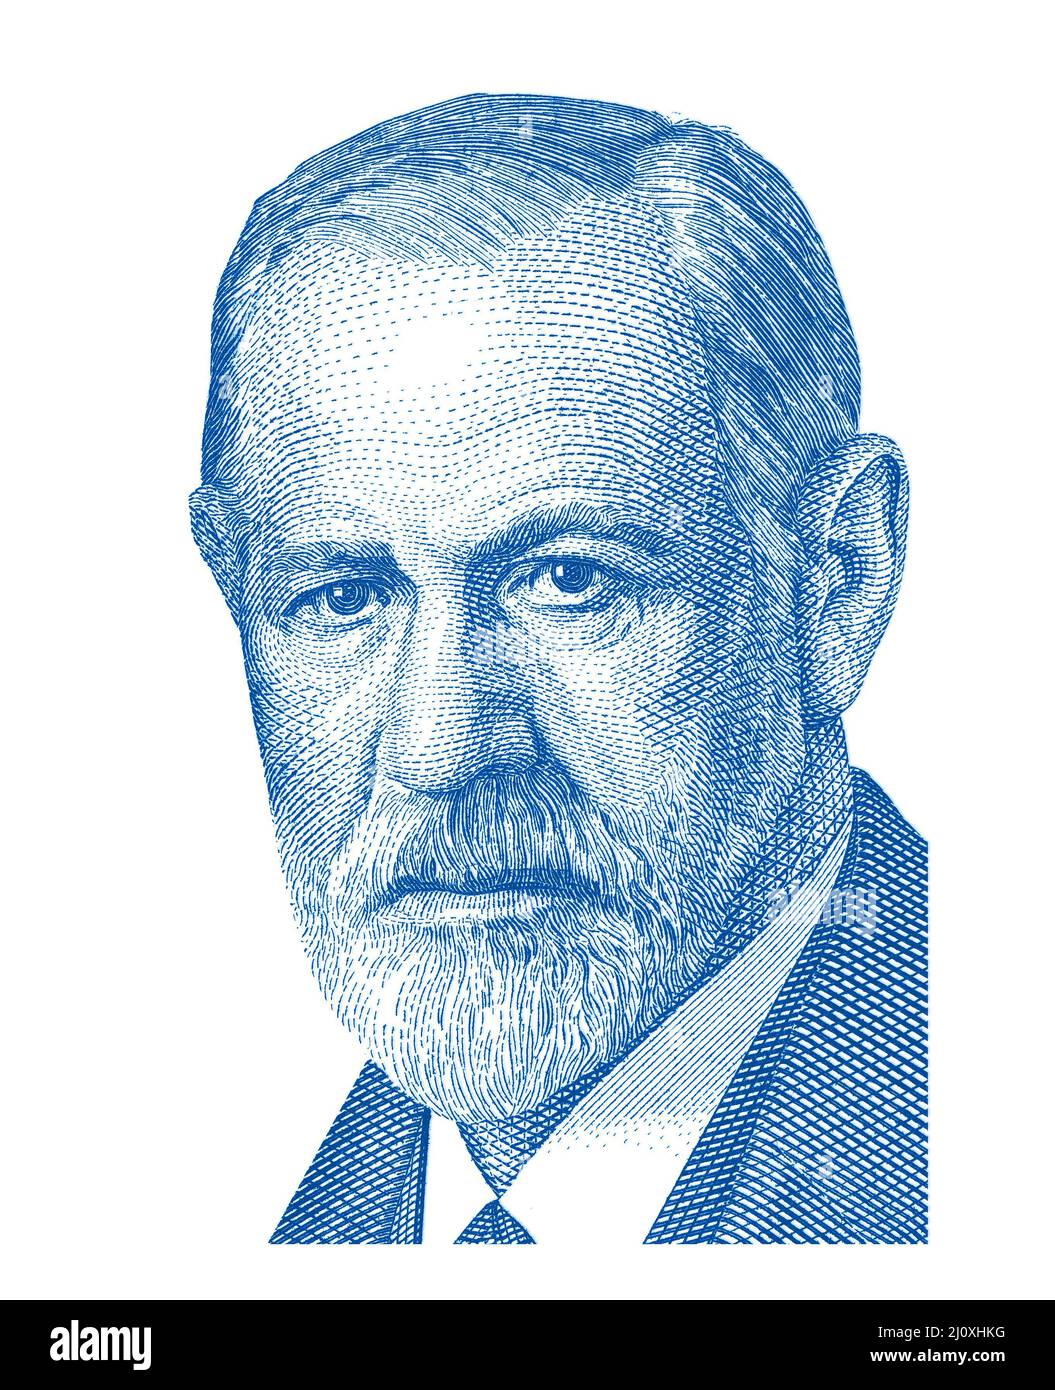 Austria sigmund freud Cut Out Stock Images & Pictures - Alamy